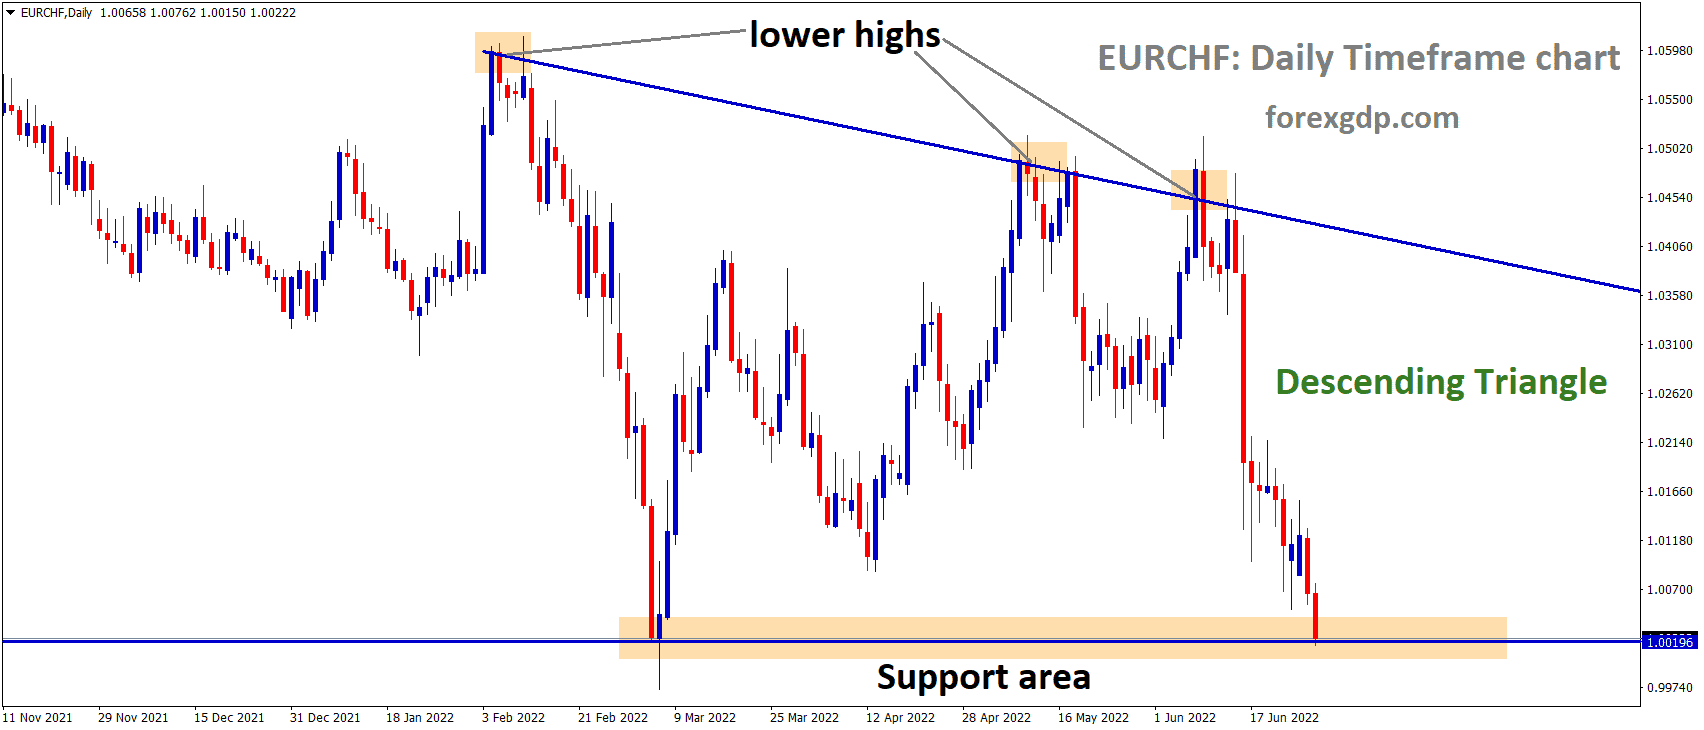 EURCHF is moving in the Descending triangle pattern and the Market has reached the Horizontal support area of the Pattern